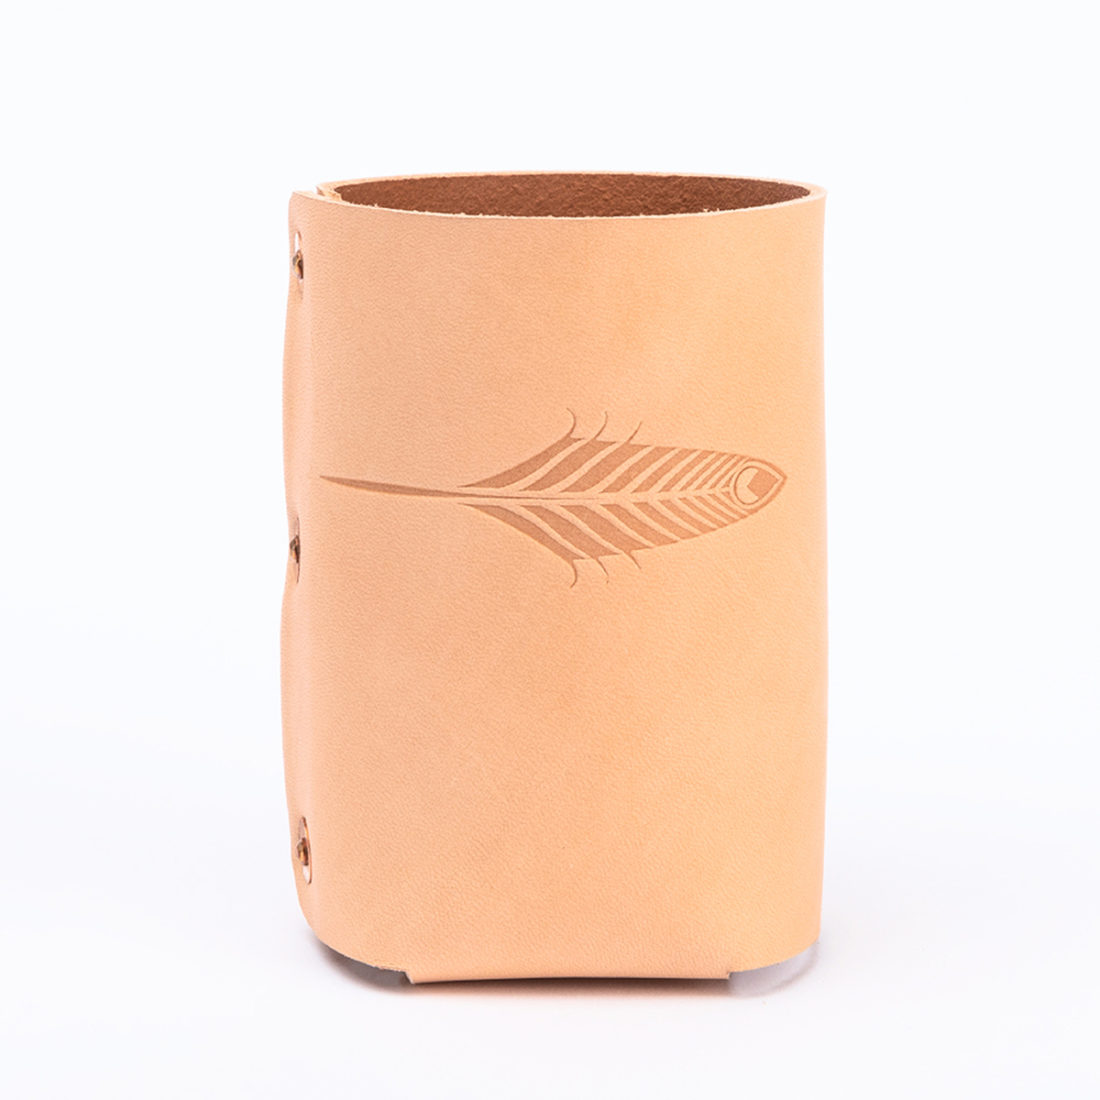 The Drink Sleeve in Natural by Iron Rivet